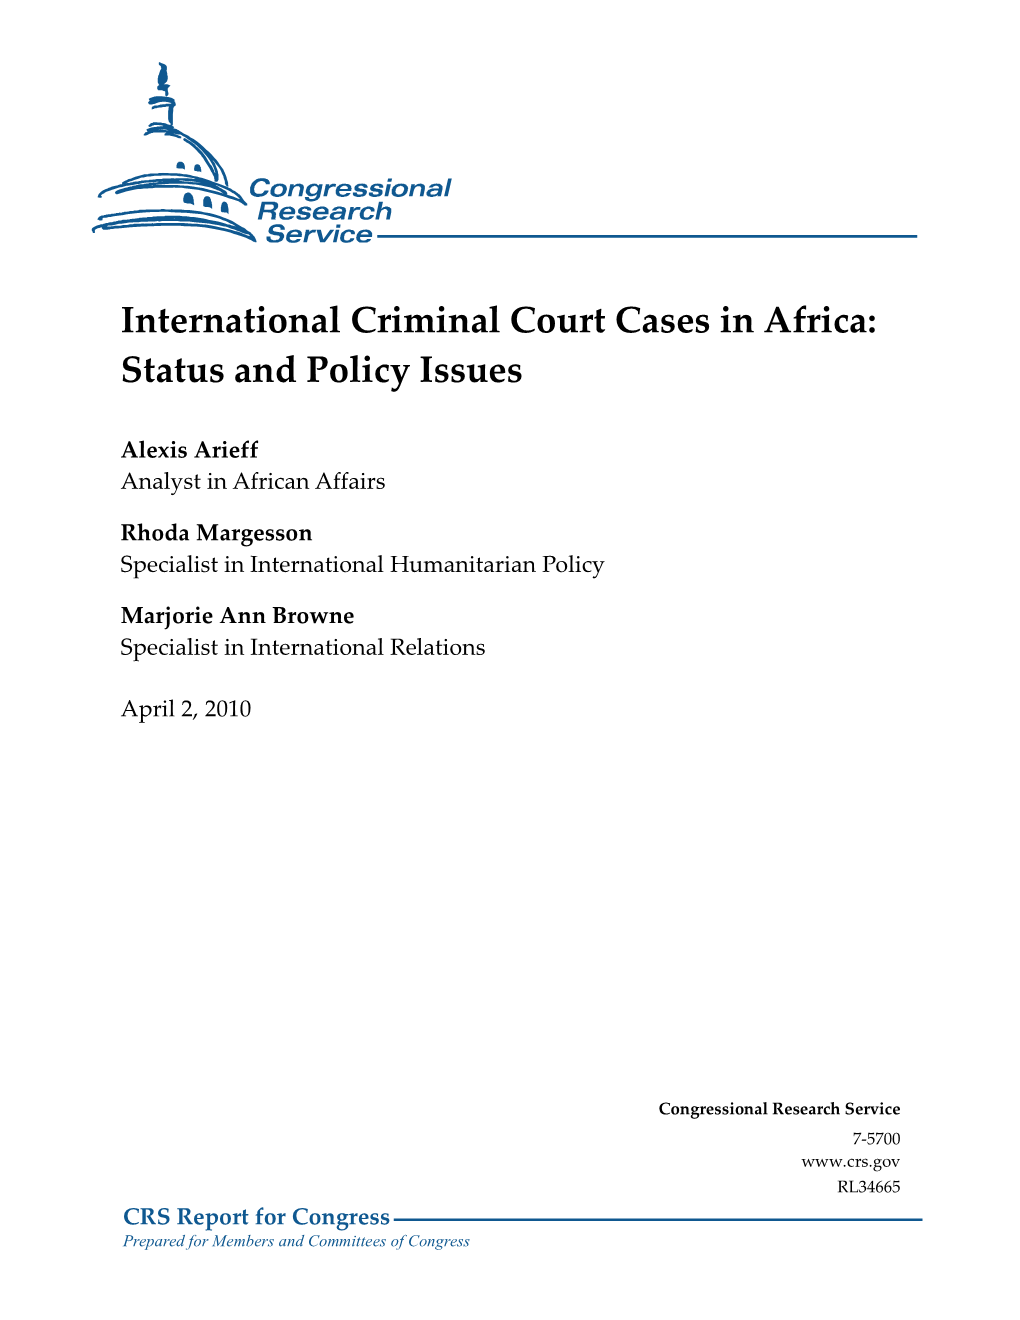 International Criminal Court Cases in Africa: Status and Policy Issues